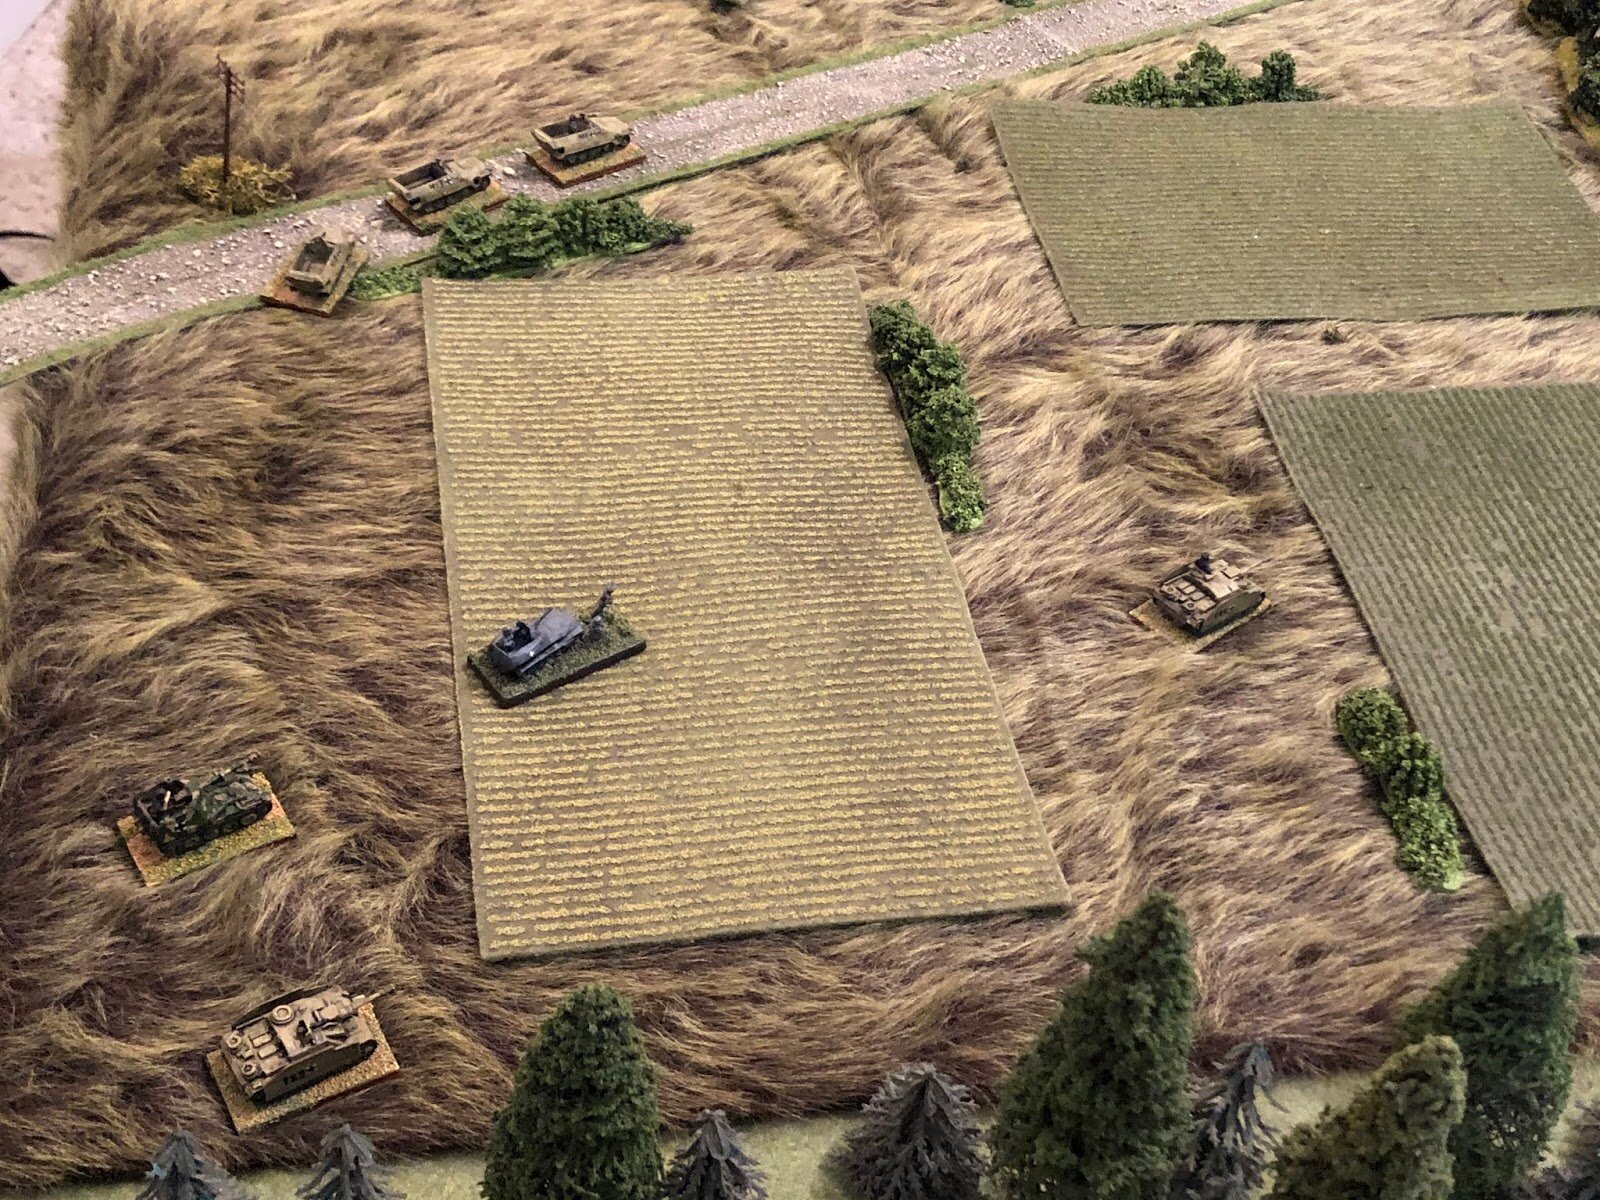  But the Germans have spotted the Soviet armor, and so the Stug platoon commander moves his vehicle up (right, from bottom left)... 